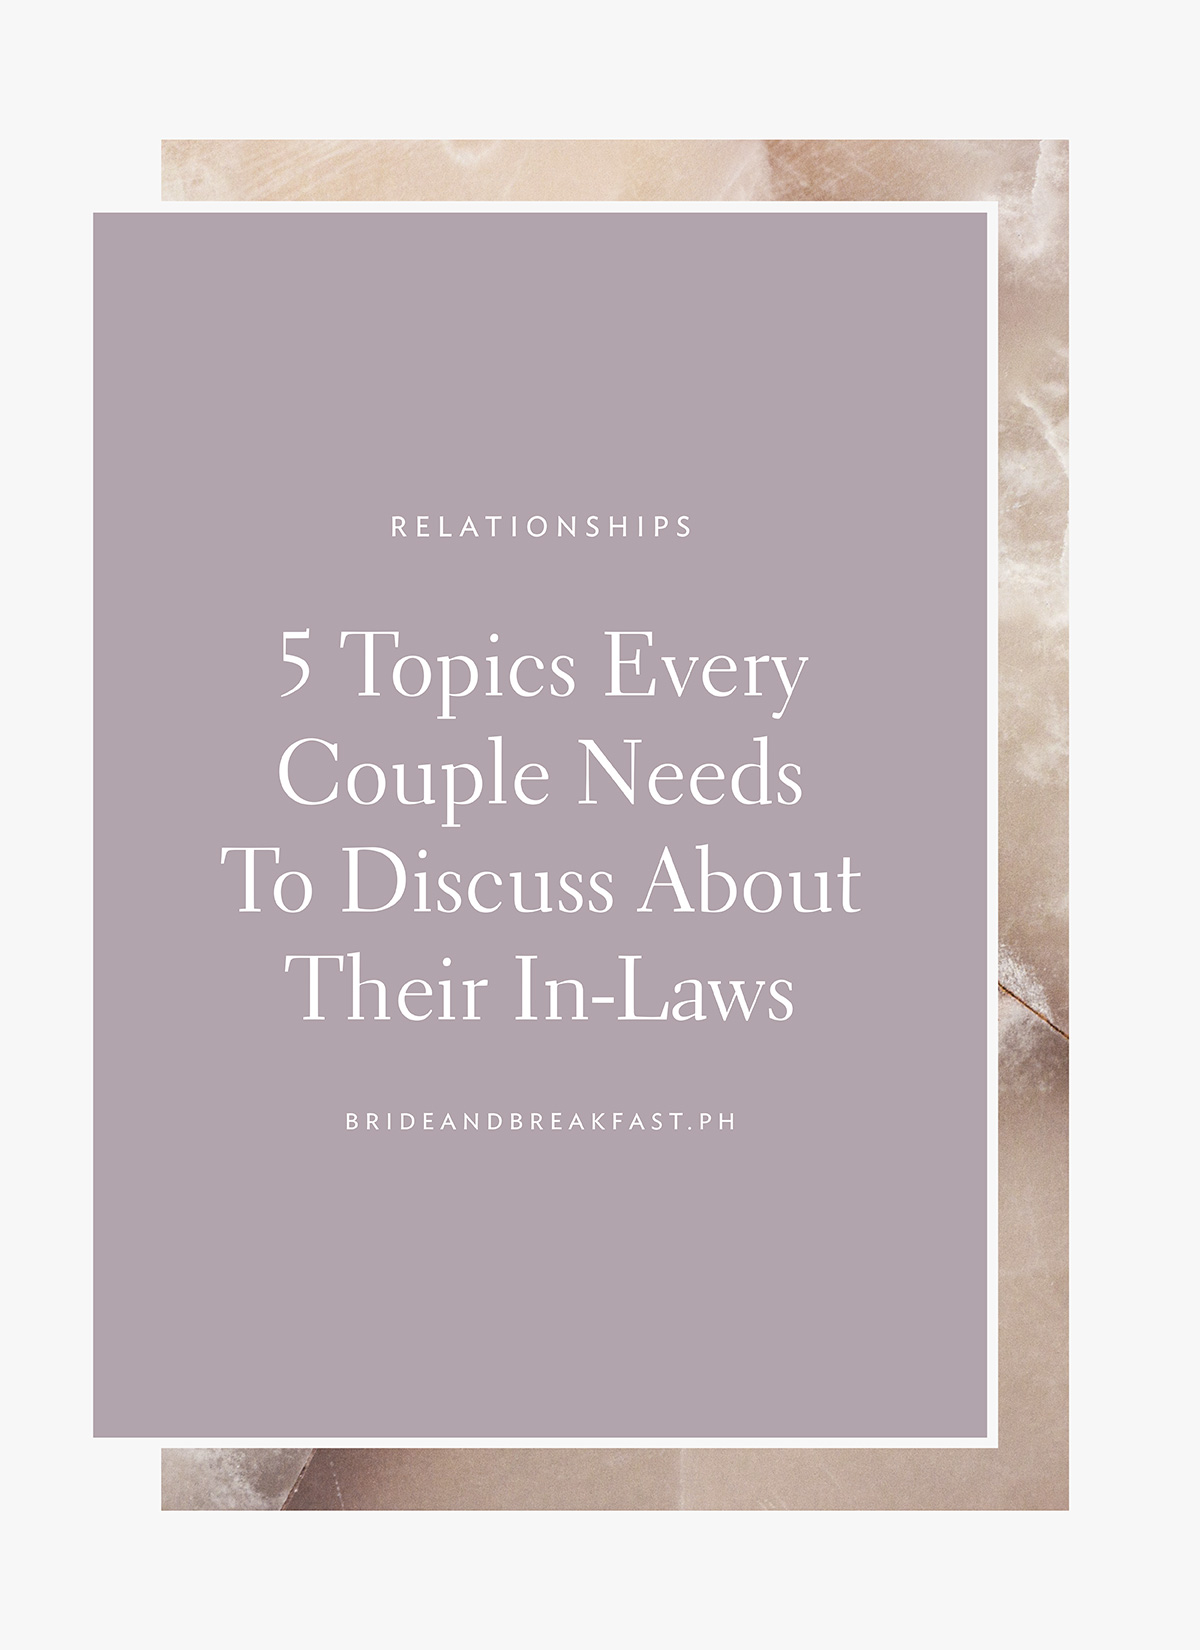 5 Topics Every Couple Needs To Discuss About Their In-Laws